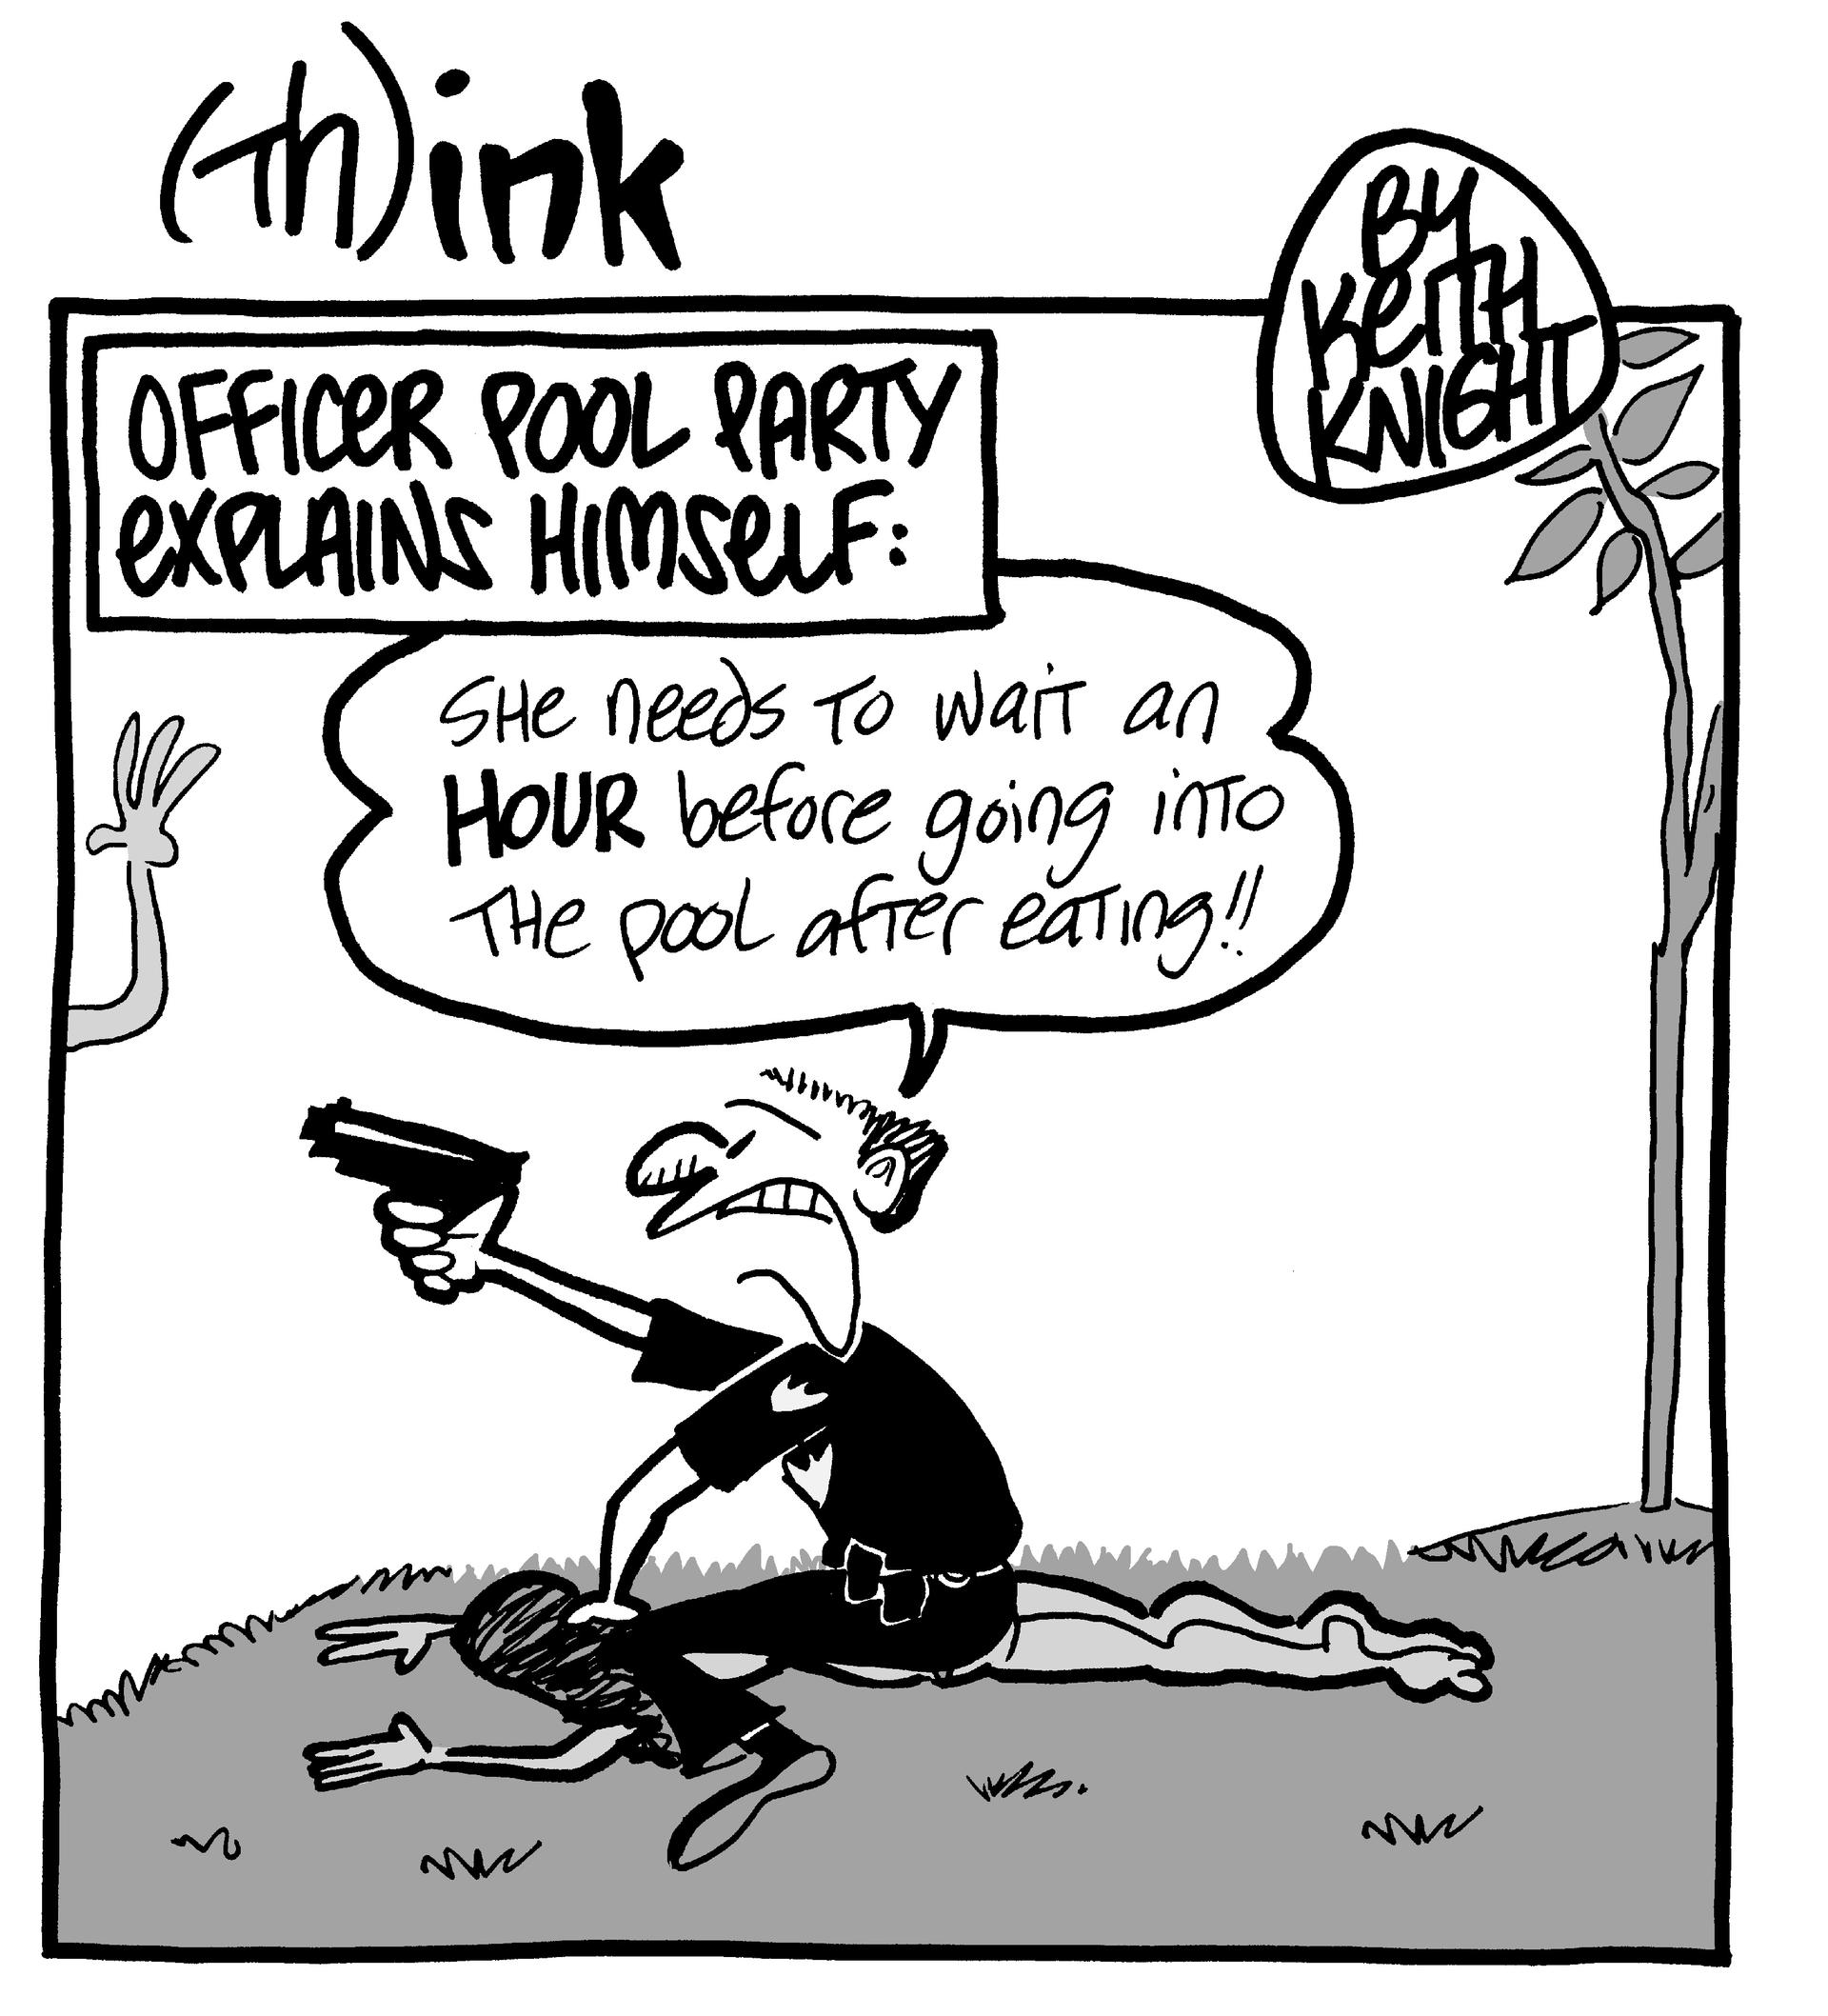 cartoon about a police intepreting hand gestures